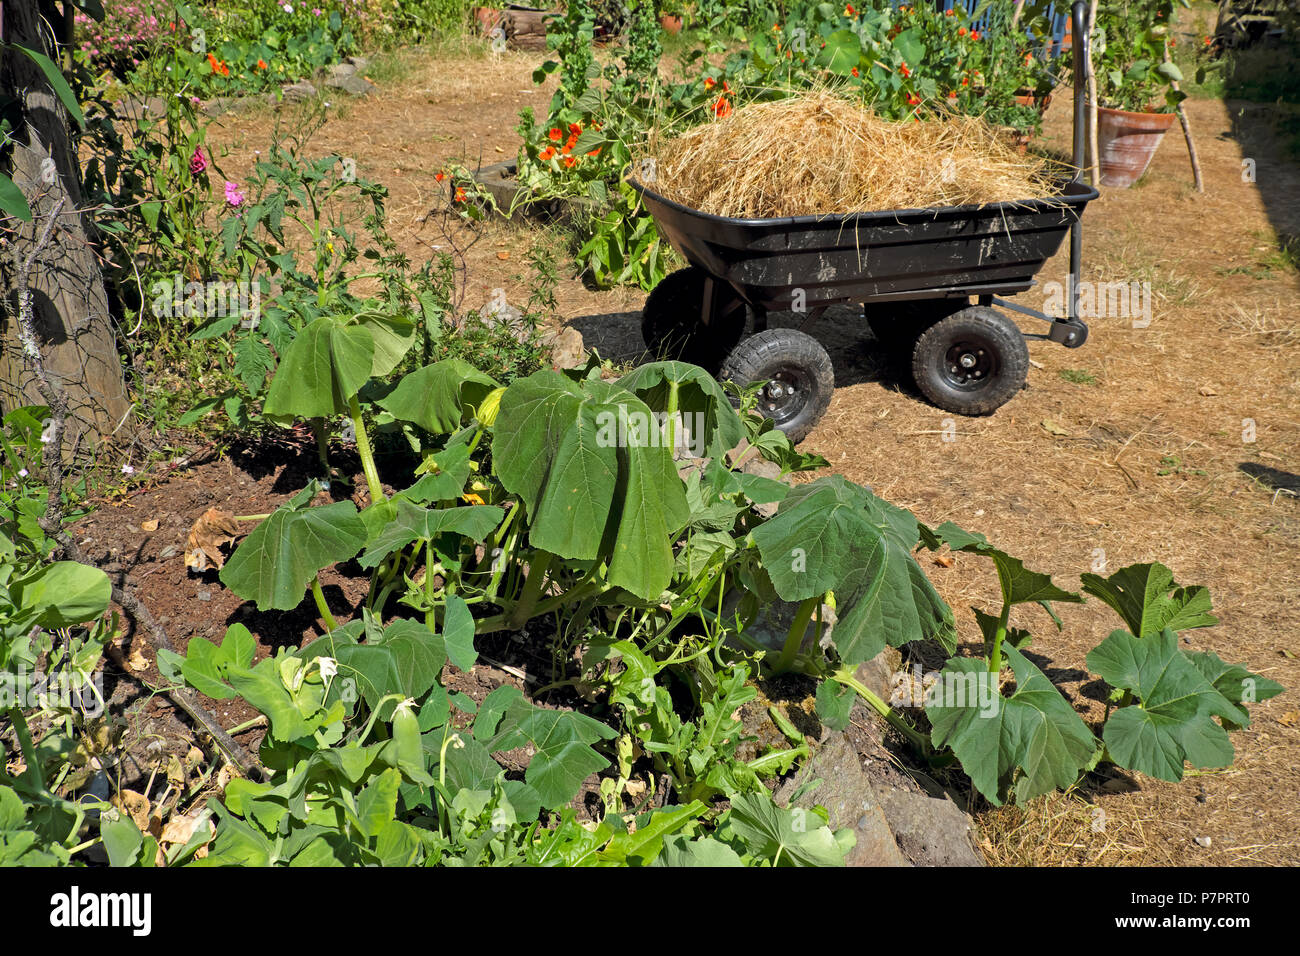 A wagon with dried straw grass to use as a mulch in the garden around dry wilting plants hot 2018 summer heatwave weather West Wales UK KATHY DEWITT Stock Photo